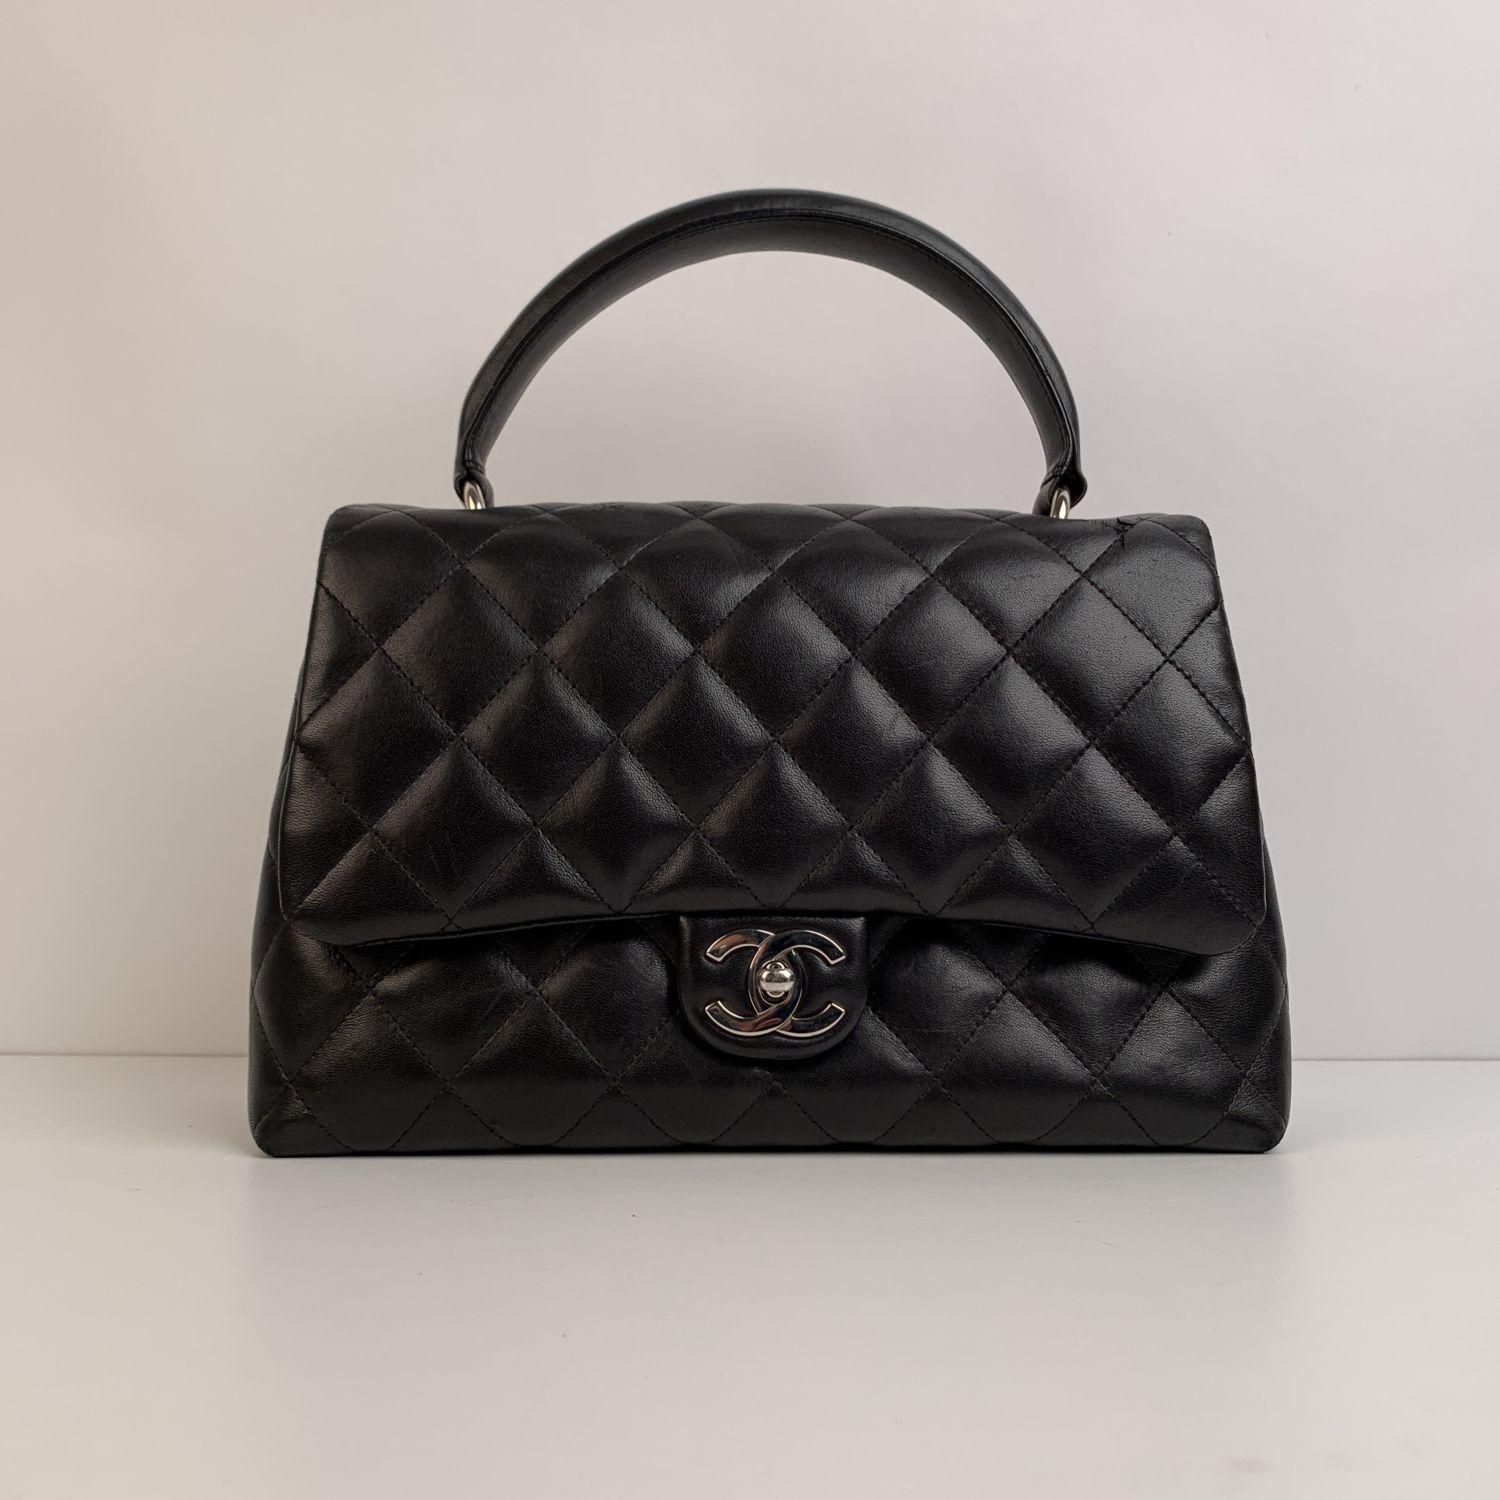 Beautiful CHANEL 'Kelly Flap Bag', from the 2005-2006 collection. Crafted in quilted leather, in black color. It features a flap front with silver metal CC - CHANEL turn lock closure and top carry handle. The bag is lined in burgundy leather and it